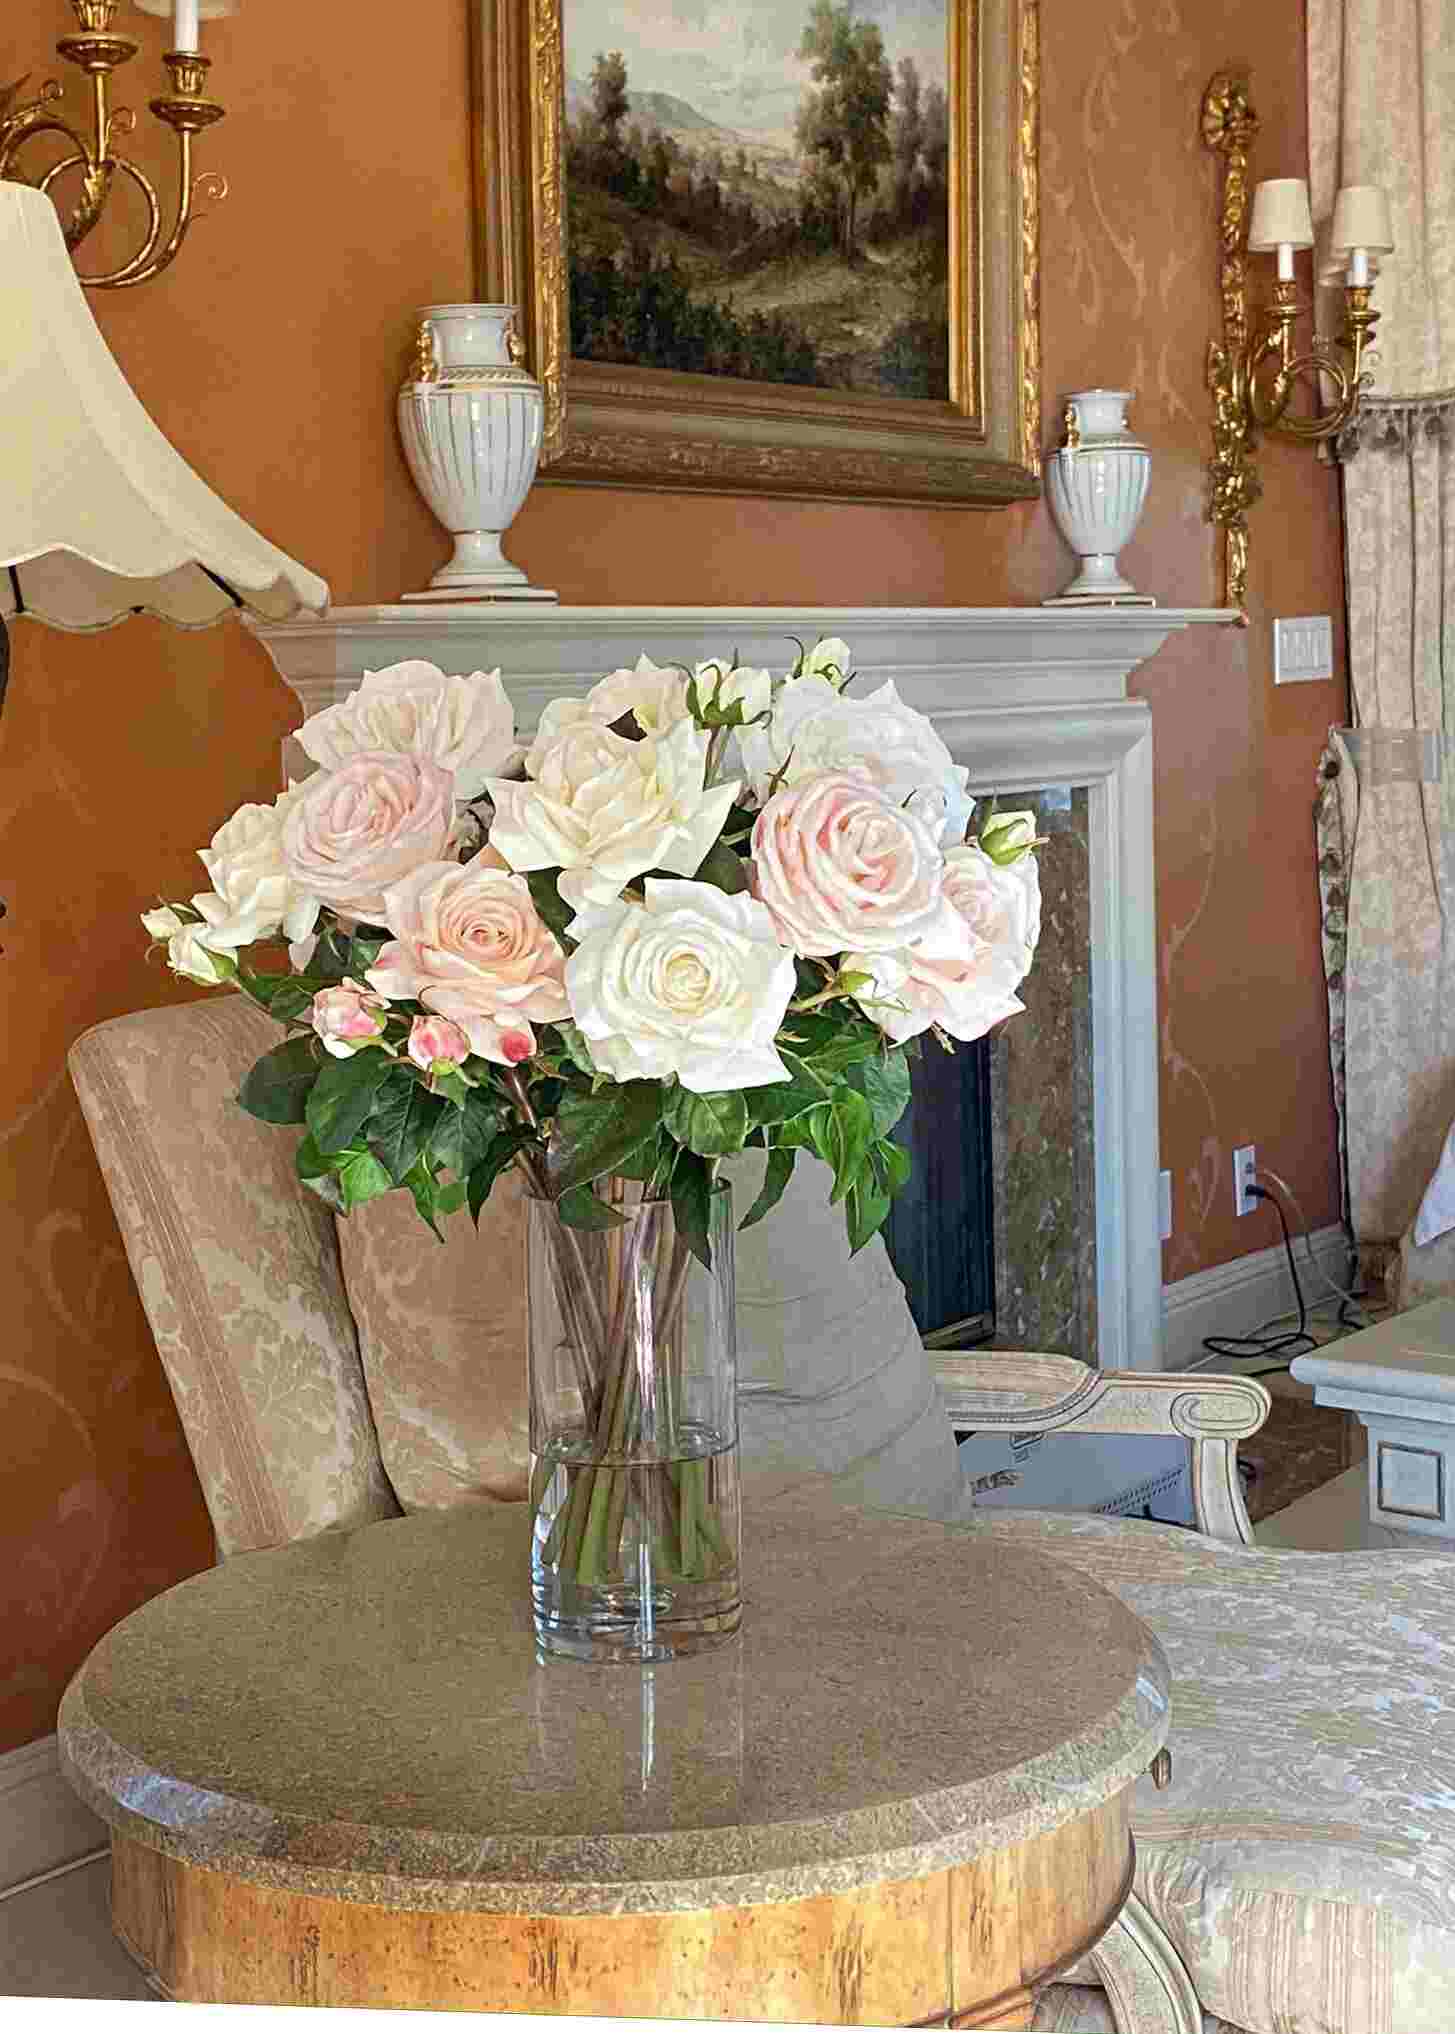 Faux rose arrangement in glass cylinder on side table